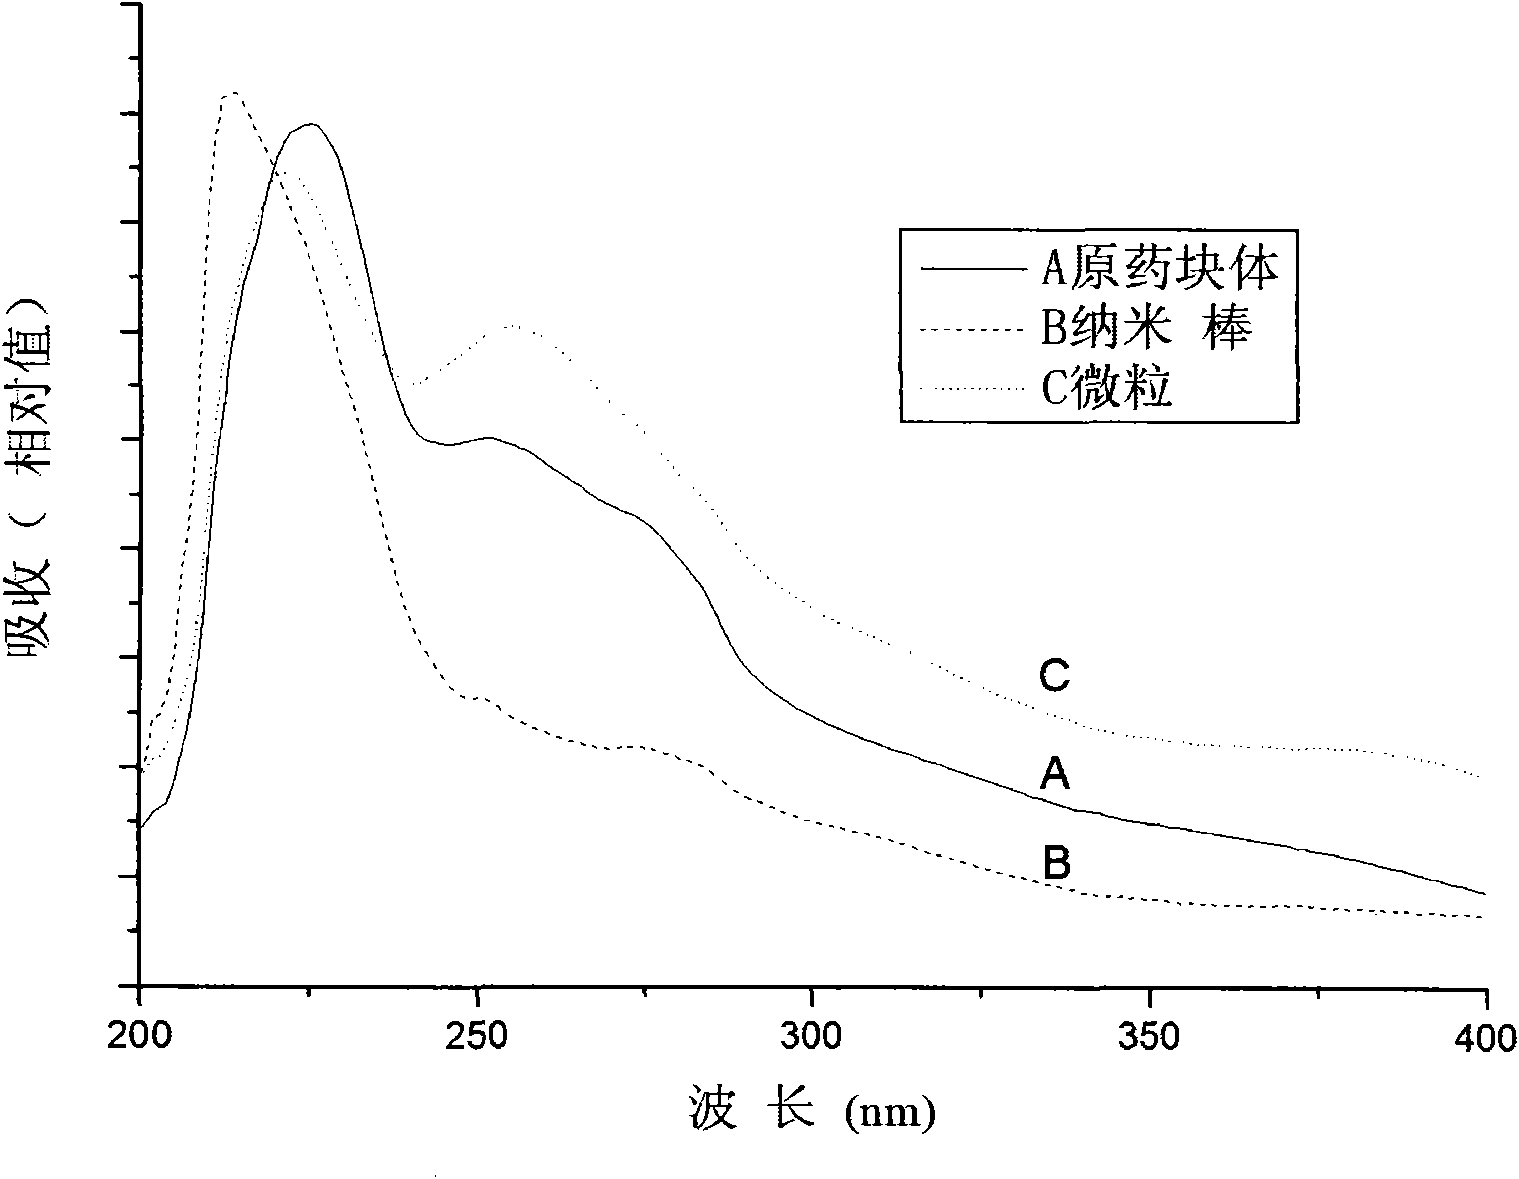 Method for preparing dichloro dicyclopentadienyl titanium and cis-platinum nano-particles by atomization ultrasound polarity difference technology